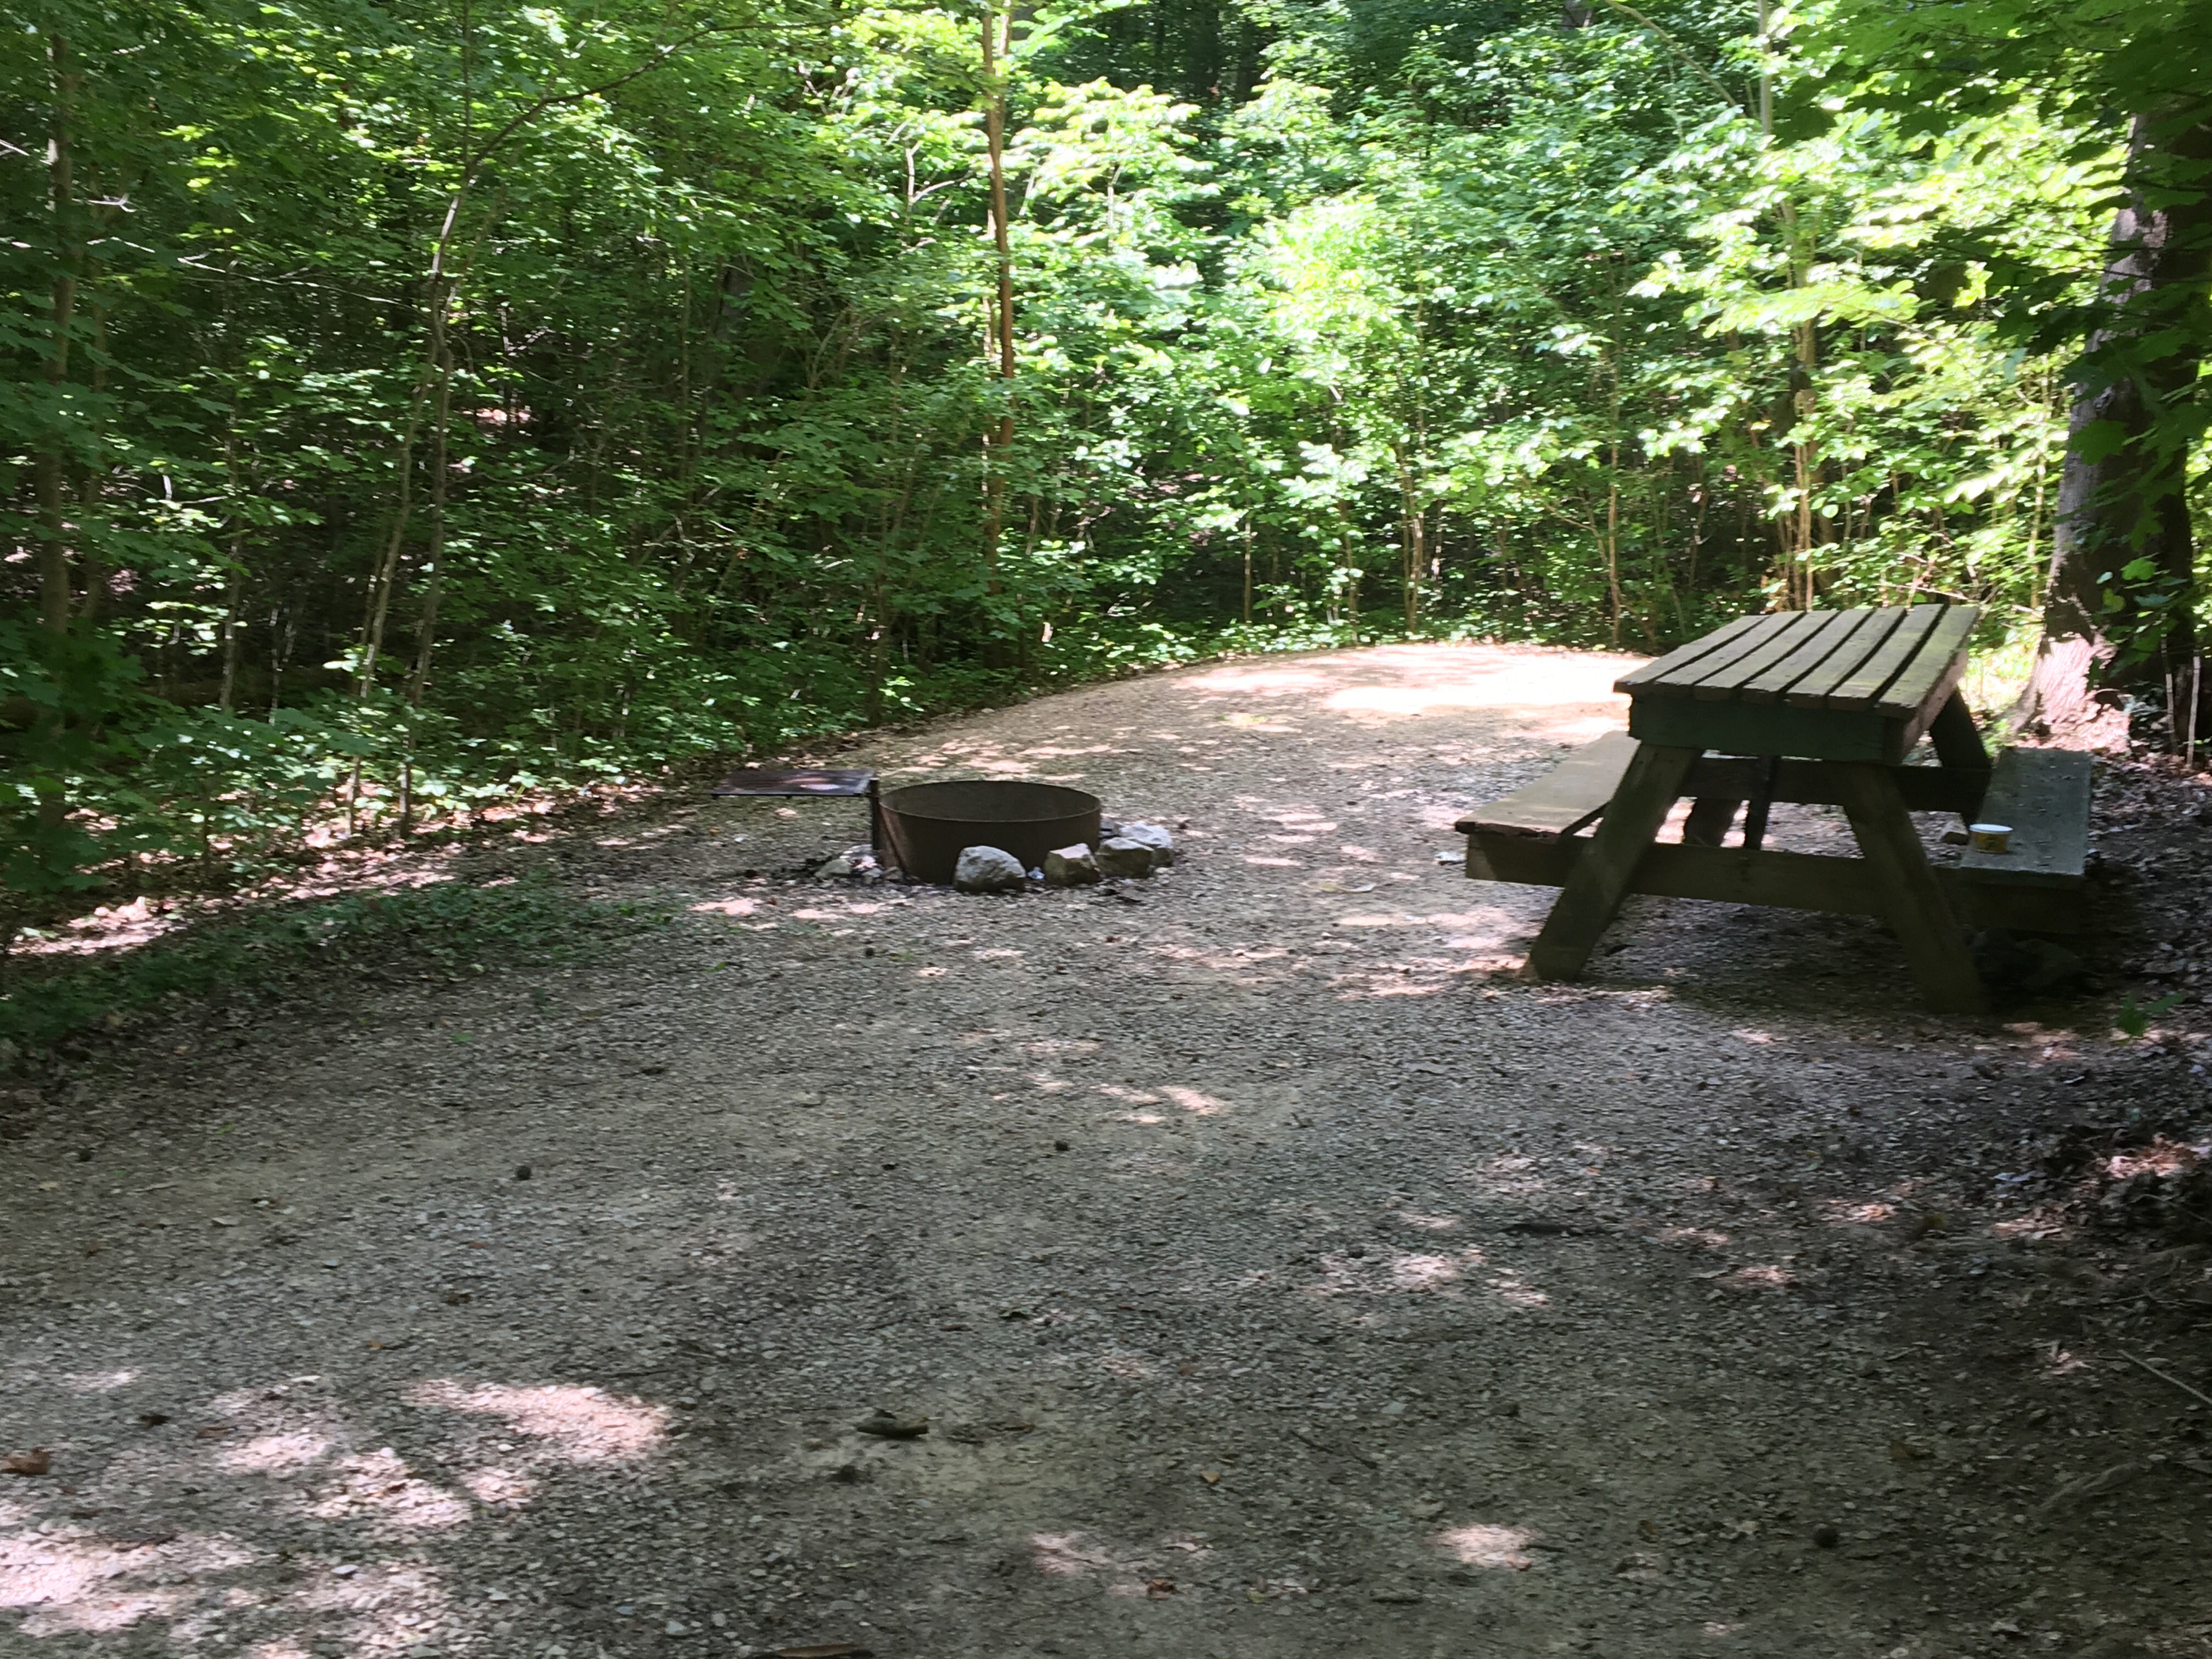 Camper submitted image from Burdette Park - 4